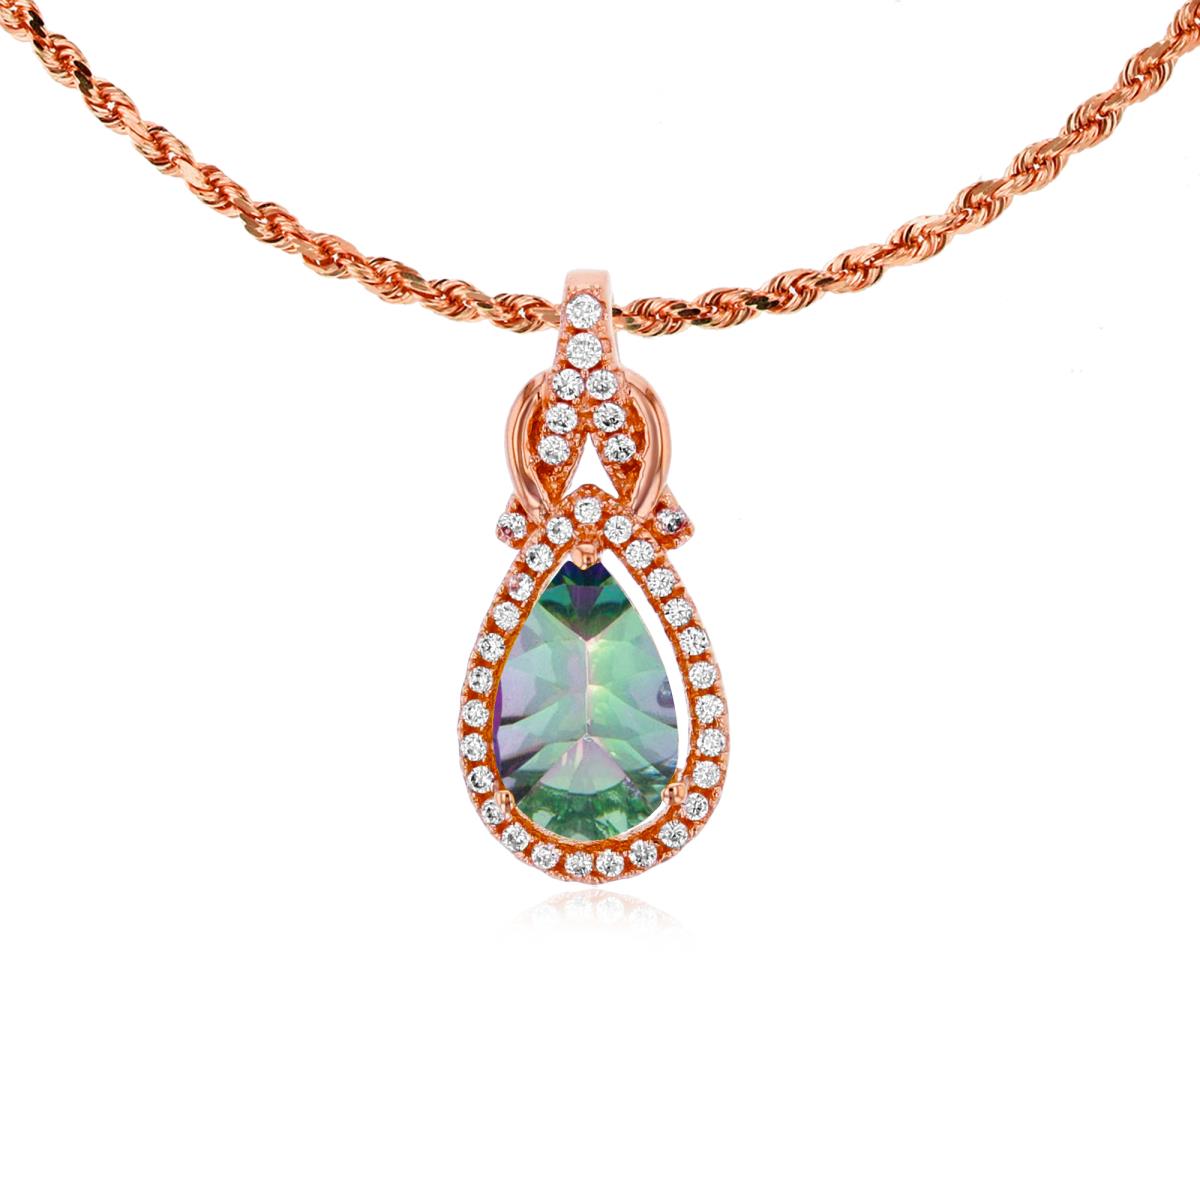 10K Rose Gold 8x5mm Pear Cut Mystic Green Topaz & 0.11 CTTW Rnd Diamond Knot 18" Rope Chain Necklace